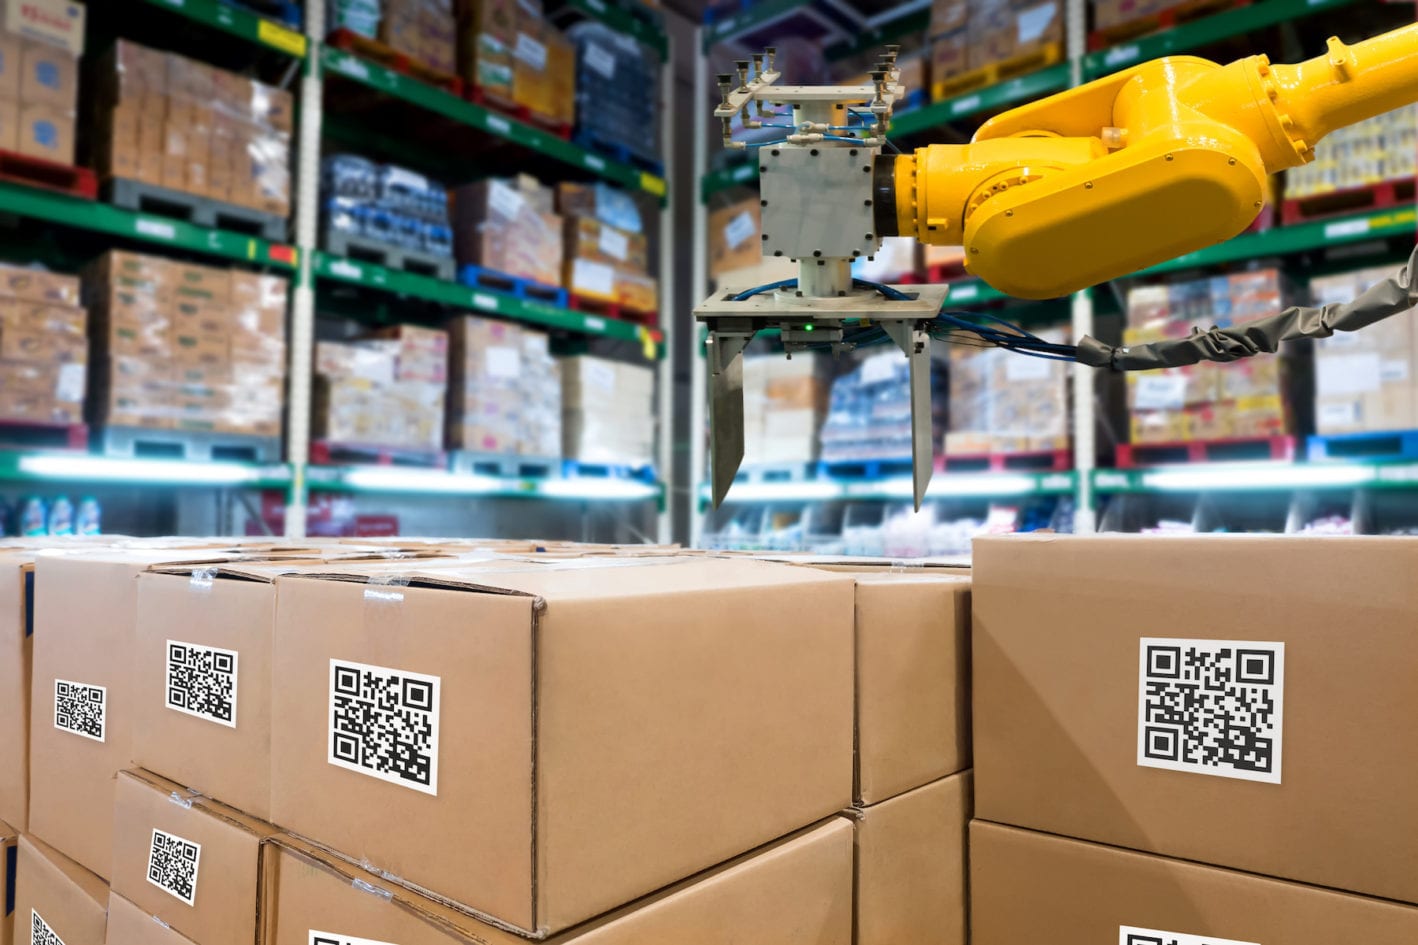 A digital manufacturing warehouse image with a robotic machine and cardboard boxes with QR codes.